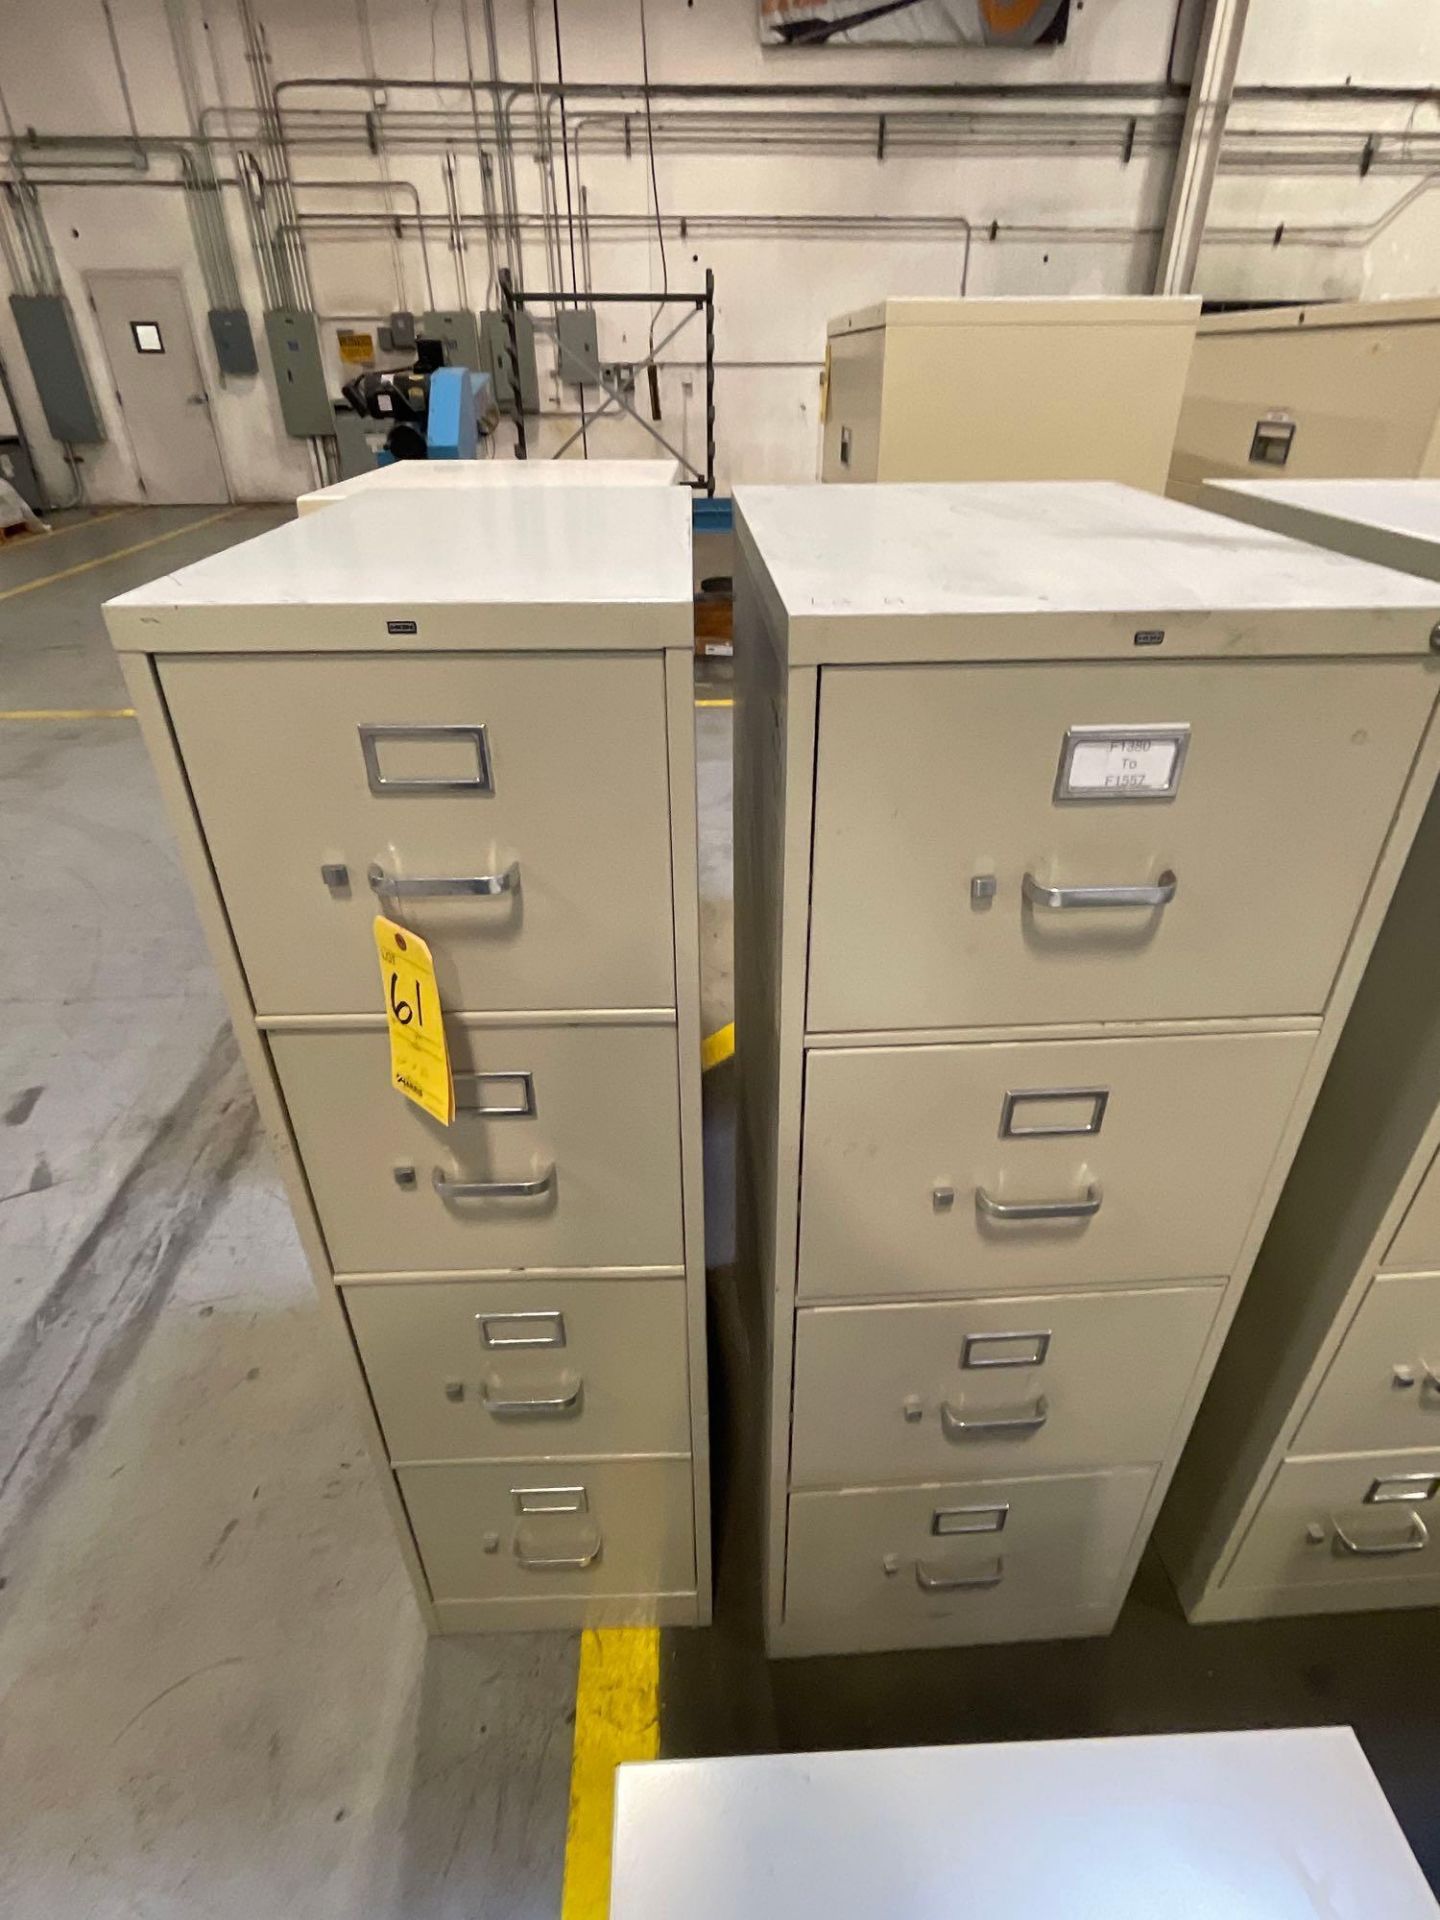 Lot of 5 Hon 4 Drawer File Cabinets: 25" X 15" X 52" - Image 3 of 5